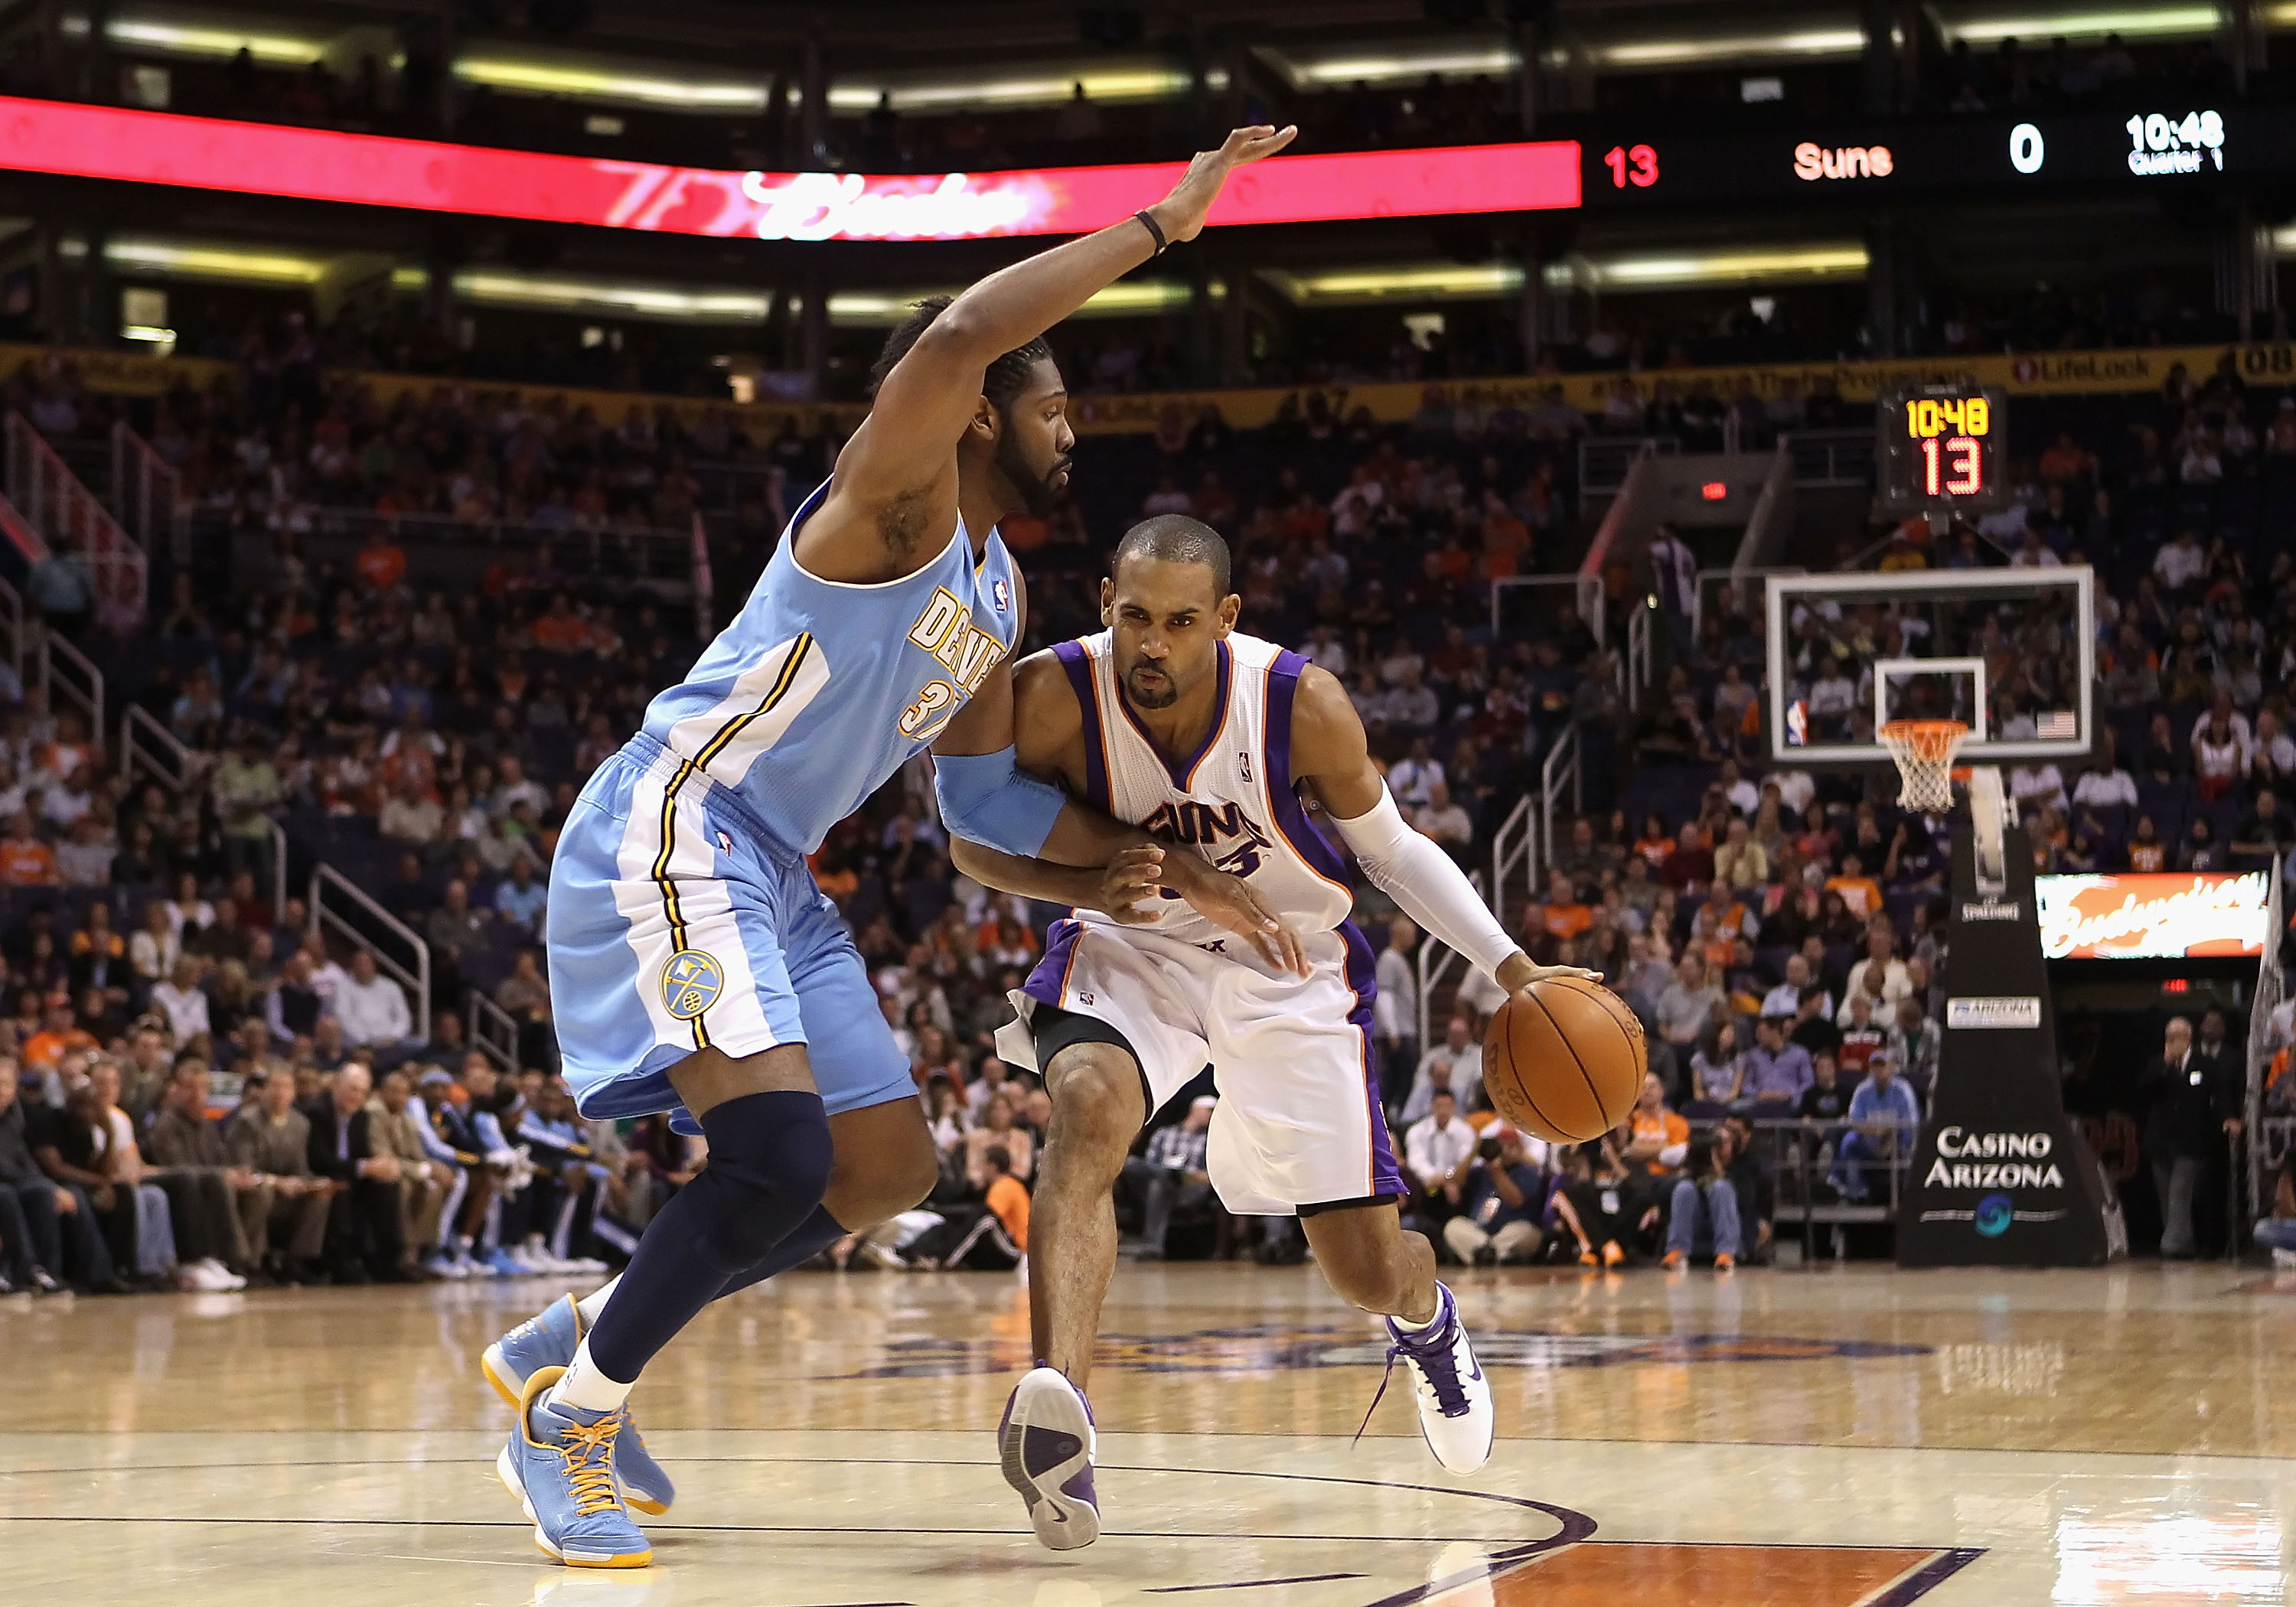 PHOENIX - NOVEMBER 15:  Grant Hill #33 of the Phoenix Suns hanldes the ball under pressure from Nene #31 of the Denver Nuggets during the NBA game at US Airways Center on November 15, 2010 in Phoenix, Arizona. NOTE TO USER: User expressly acknowledges and